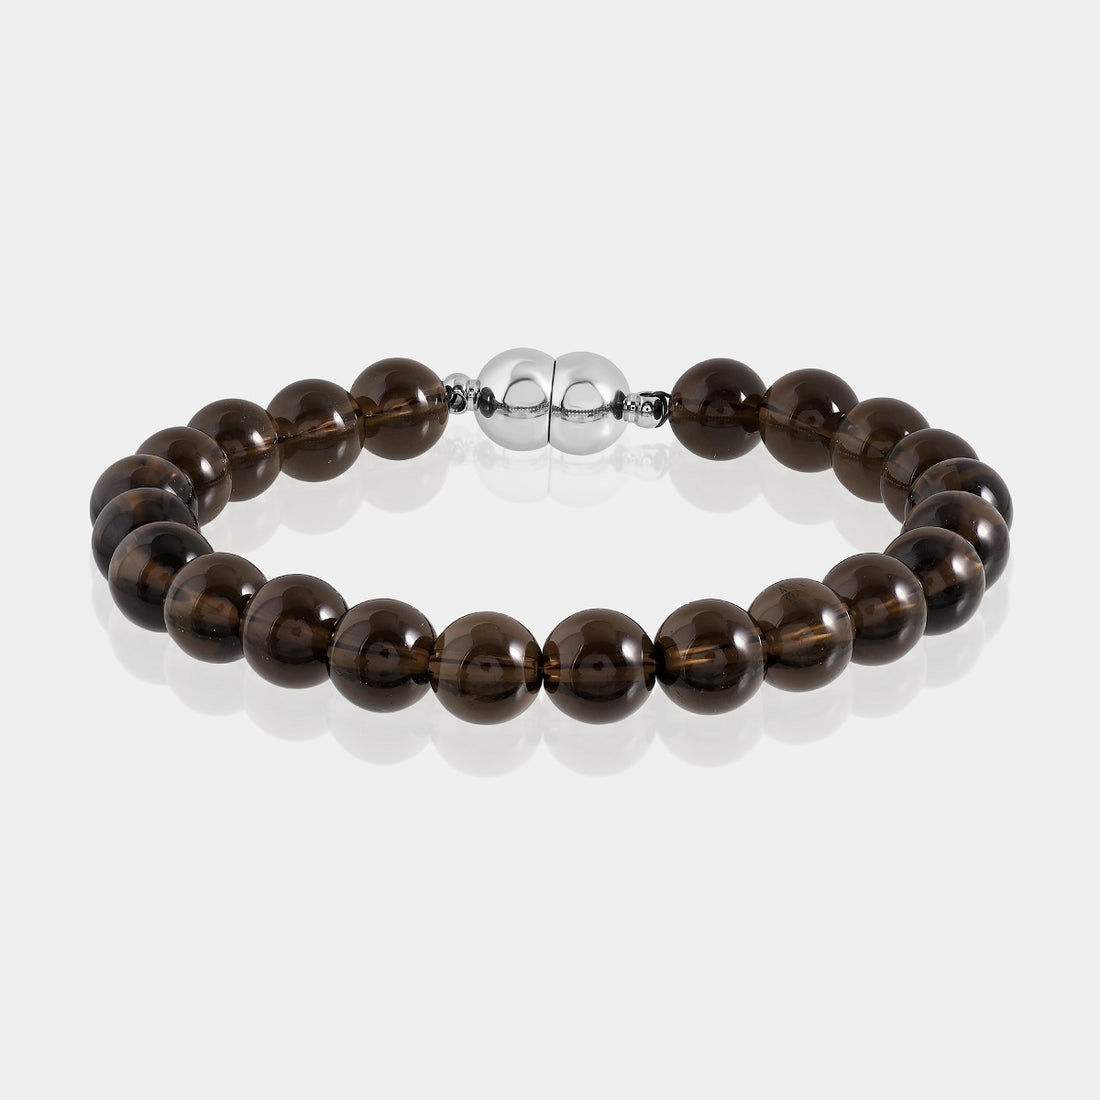 A close-up of a handmade bracelet featuring smooth round smoky quartz gemstone beads in a rich brown hue, exuding elegance and sophistication.